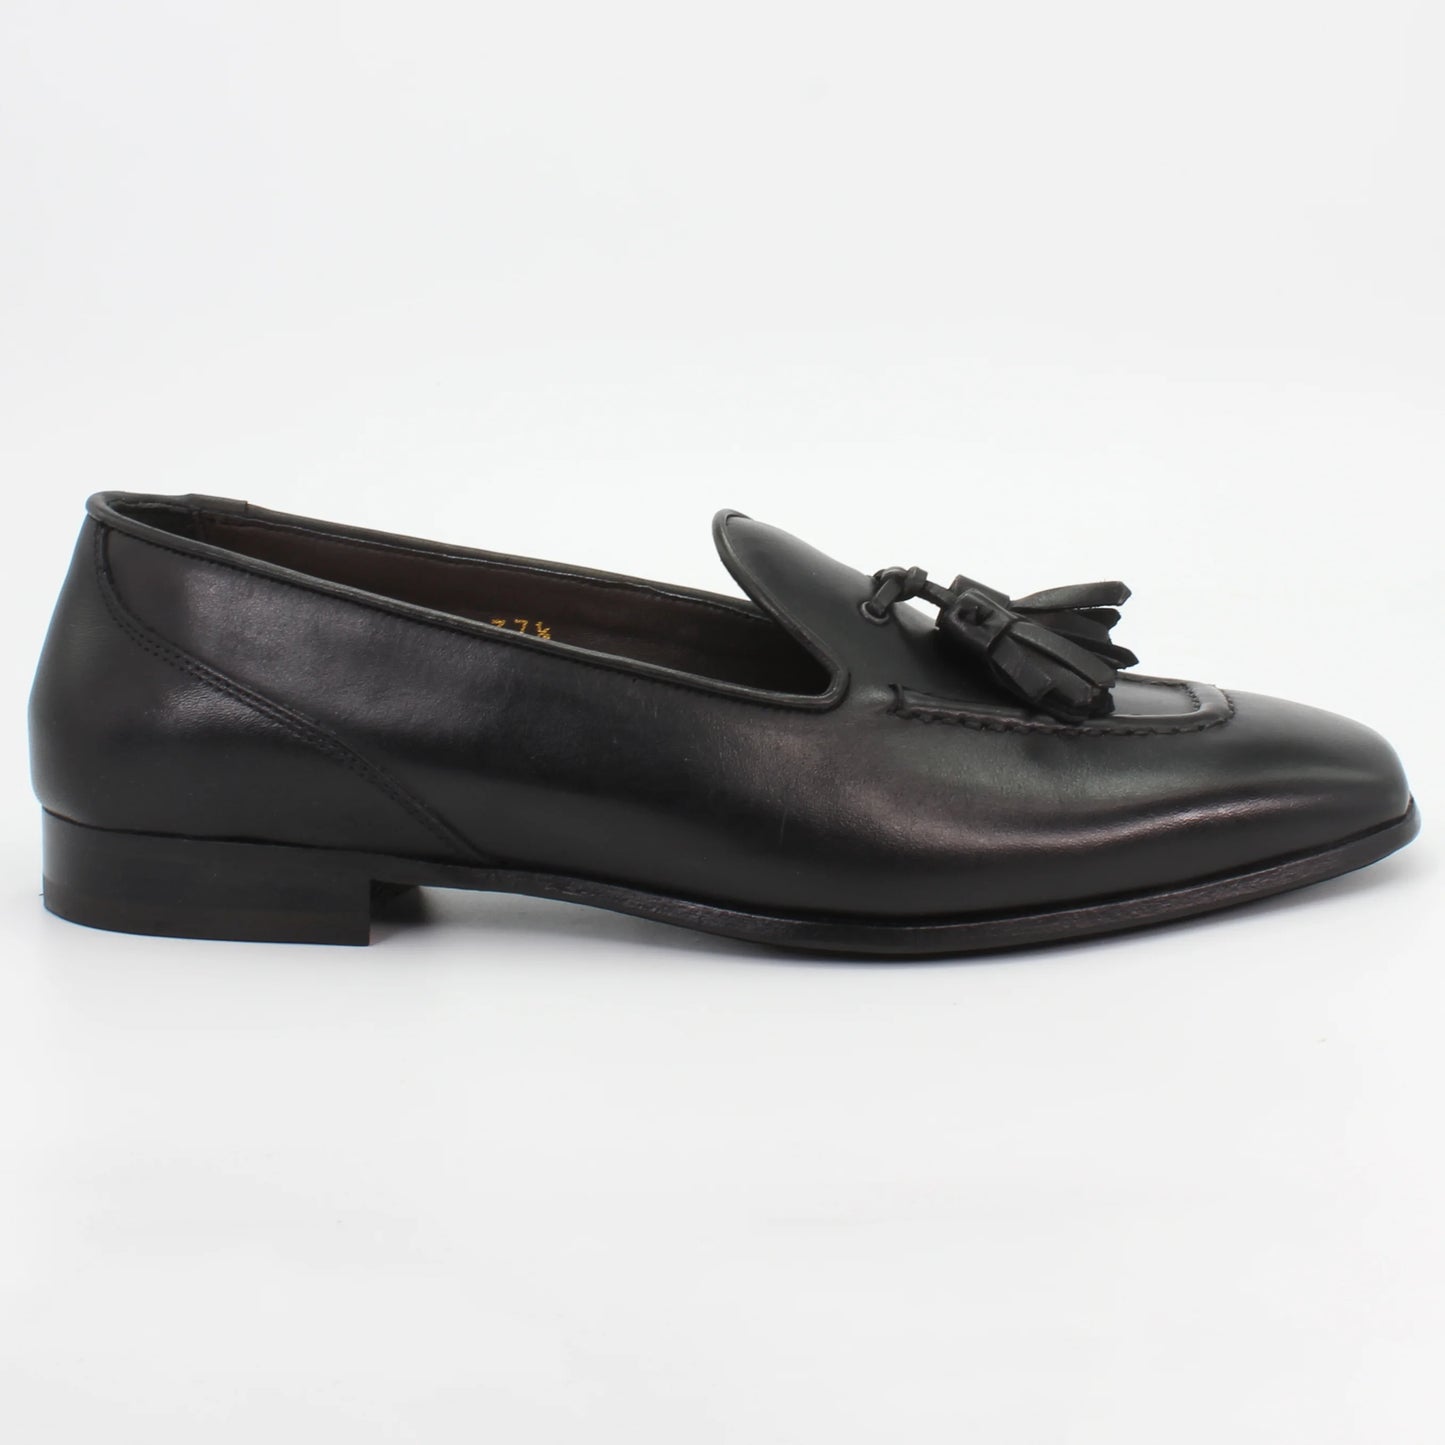 Shop Handmade Italian Leather moccasin in black (BRD10678) or browse our range of hand-made Italian shoes for men in leather or suede in-store at Aliverti Cape Town, or shop online. We deliver in South Africa & offer multiple payment plans as well as accept multiple safe & secure payment methods.